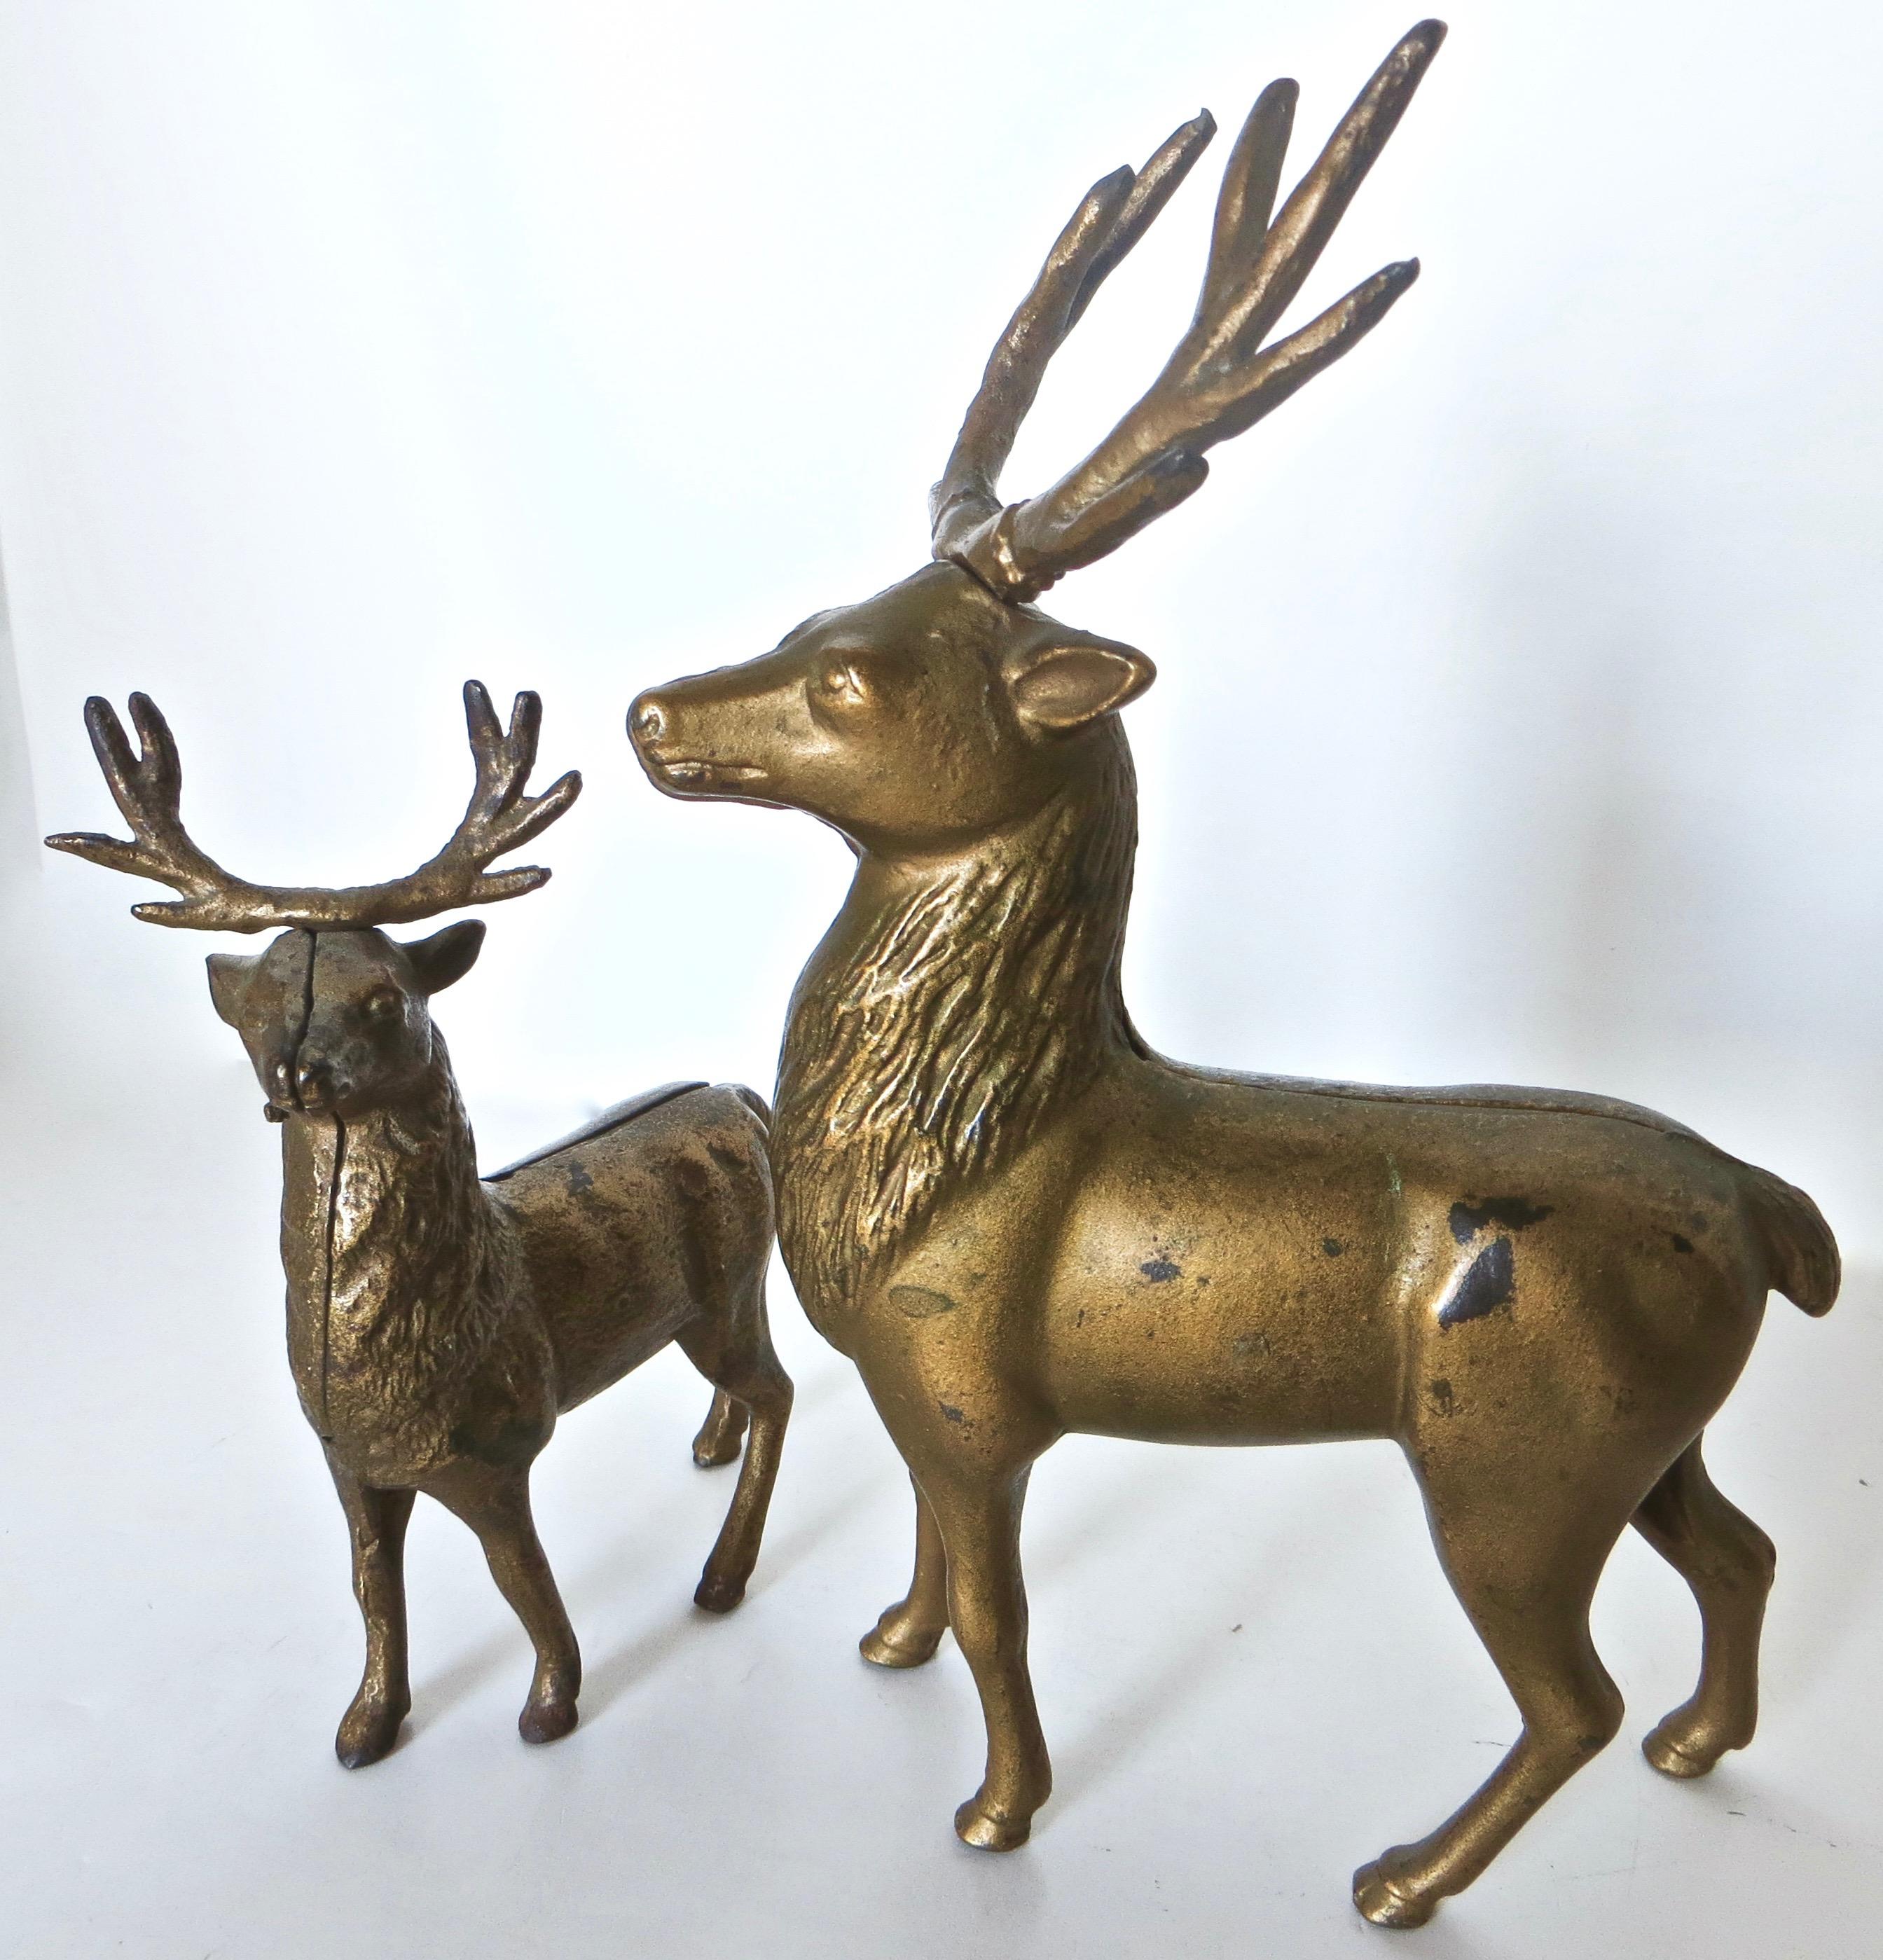 These two authentic cast iron antique still banks depict a large reindeer and a smaller one standing nearby. Together, they make a wonderful Christmas or holiday winter display. They are both of American manufacture and were made circa 1910 by the